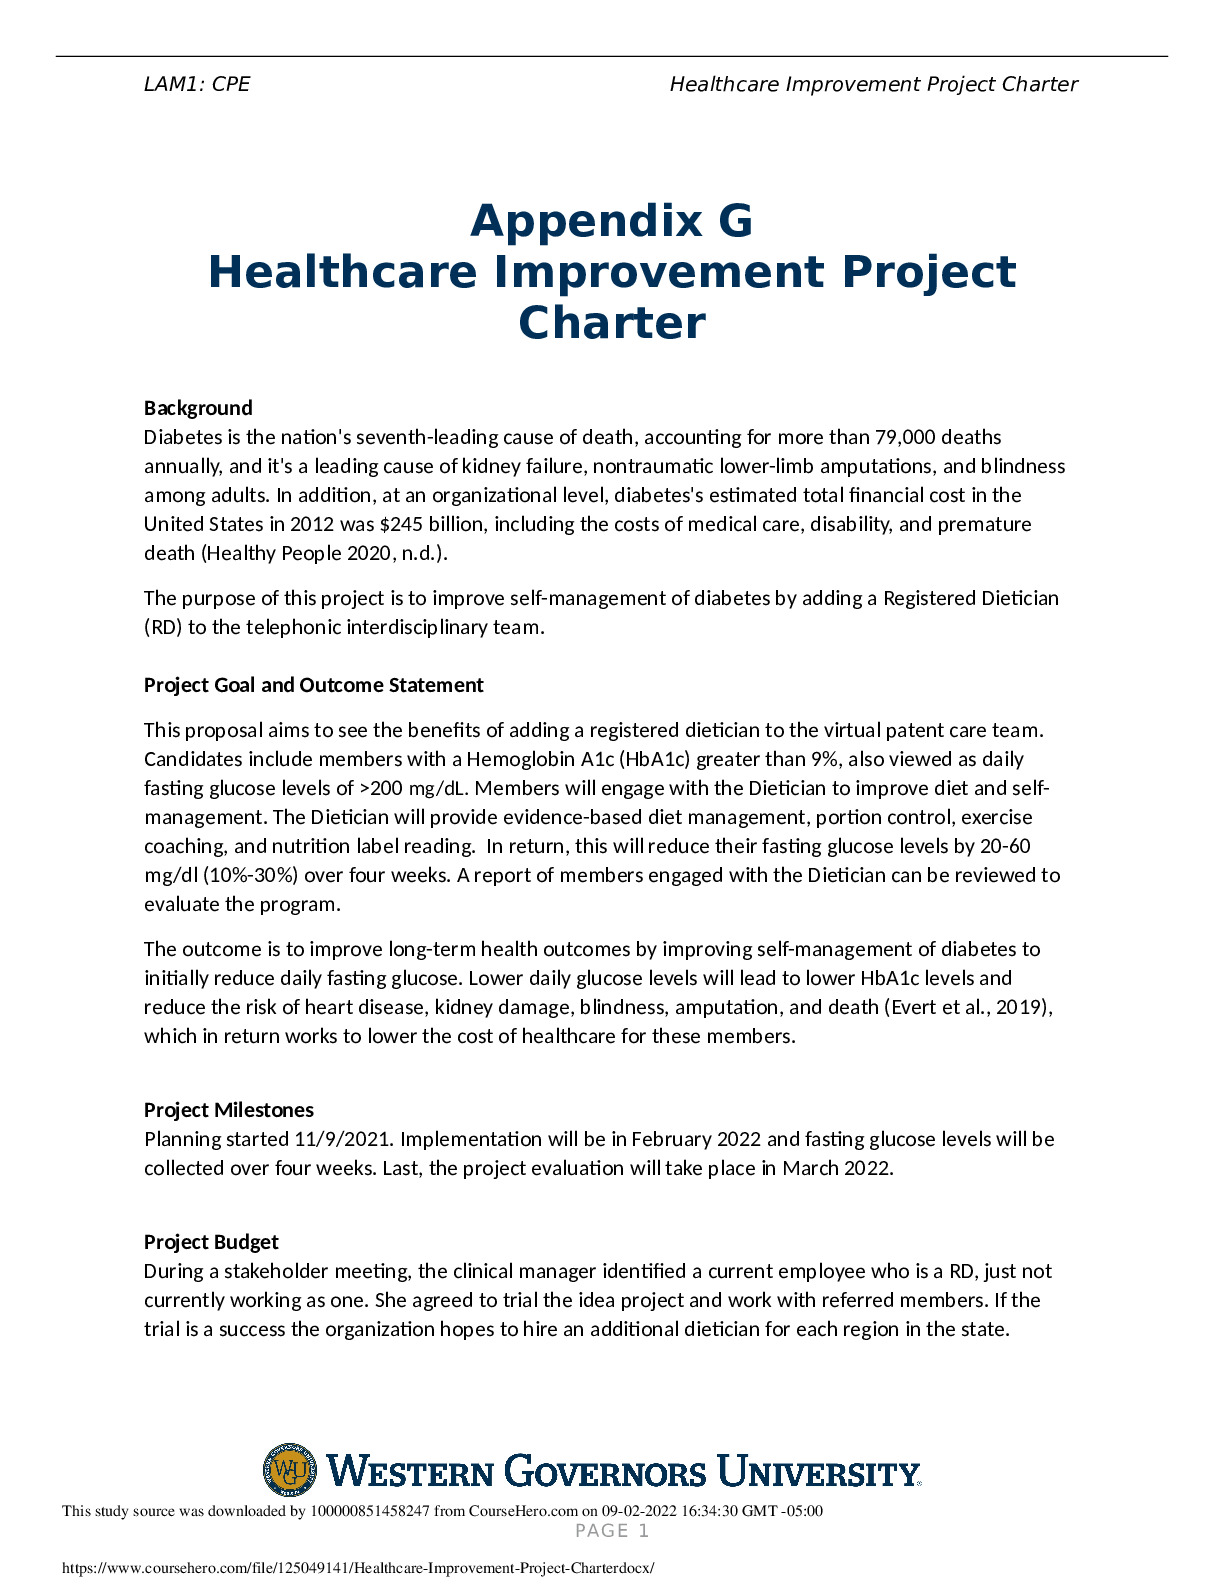 Healthcare_Improvement_Project_Charter.docx